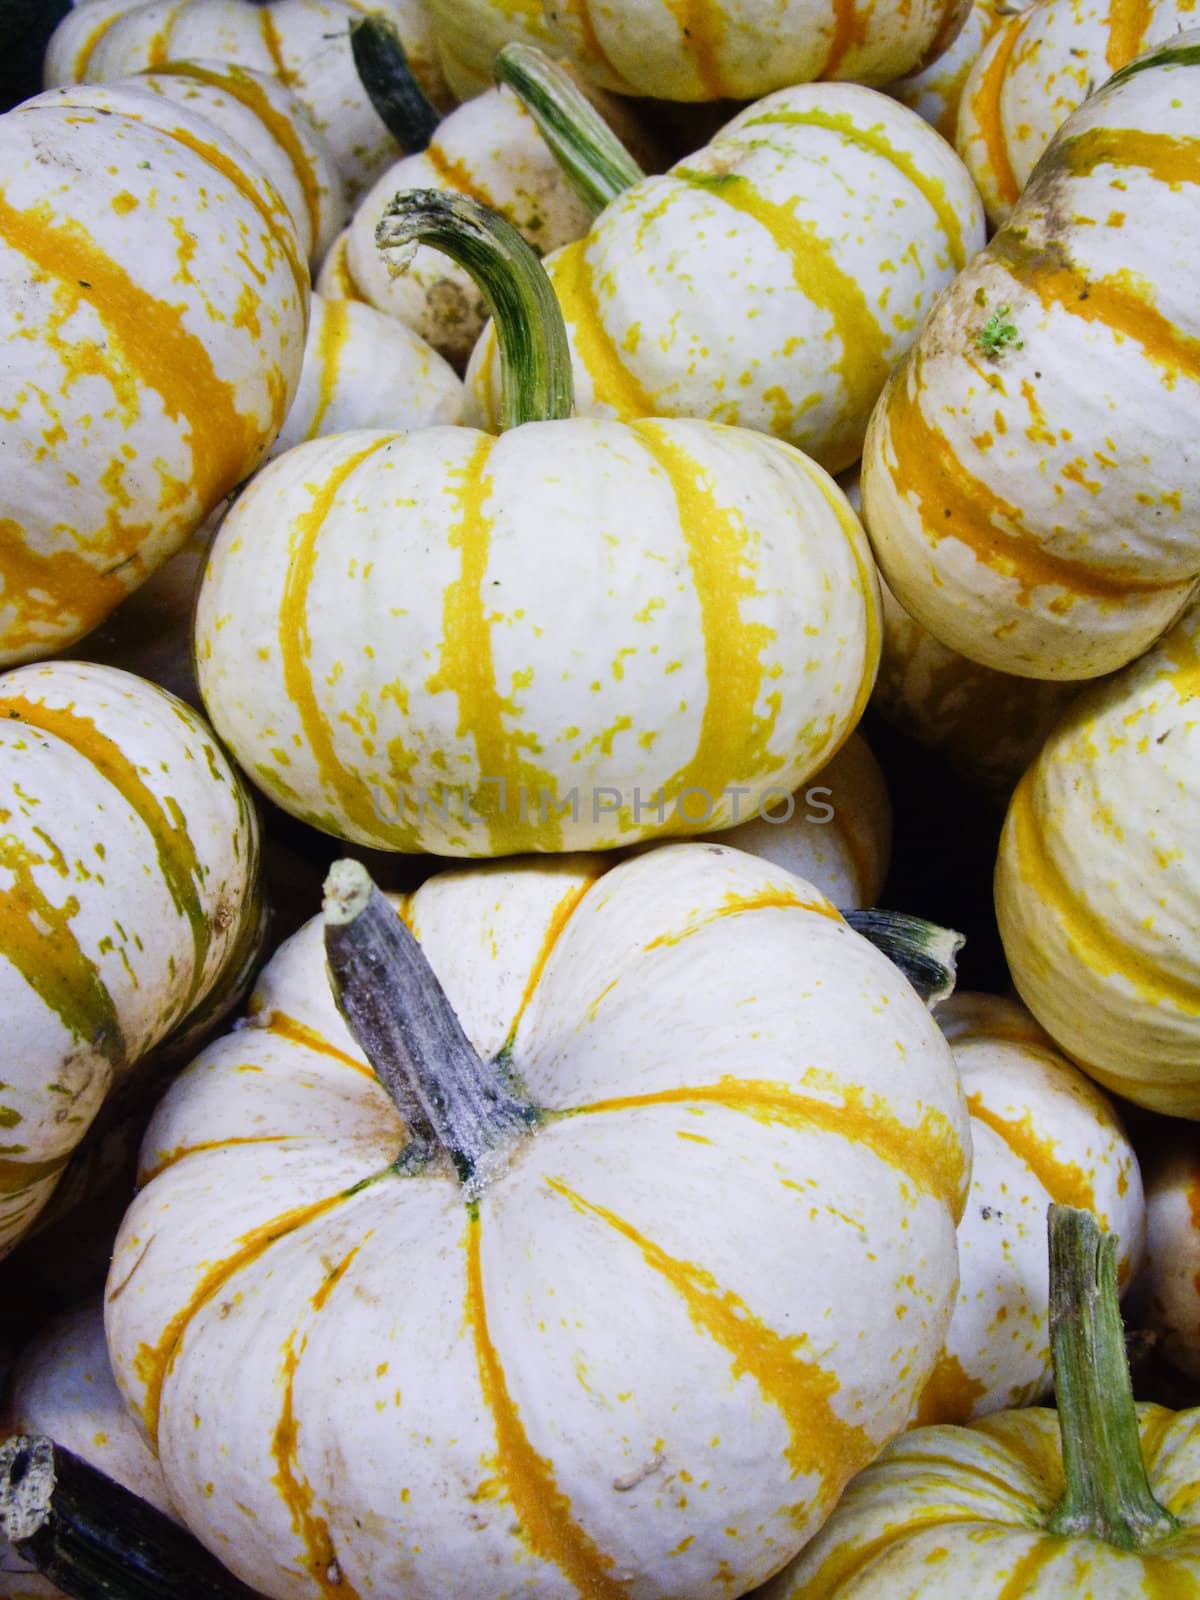 Gourds with yellow stripe by emattil